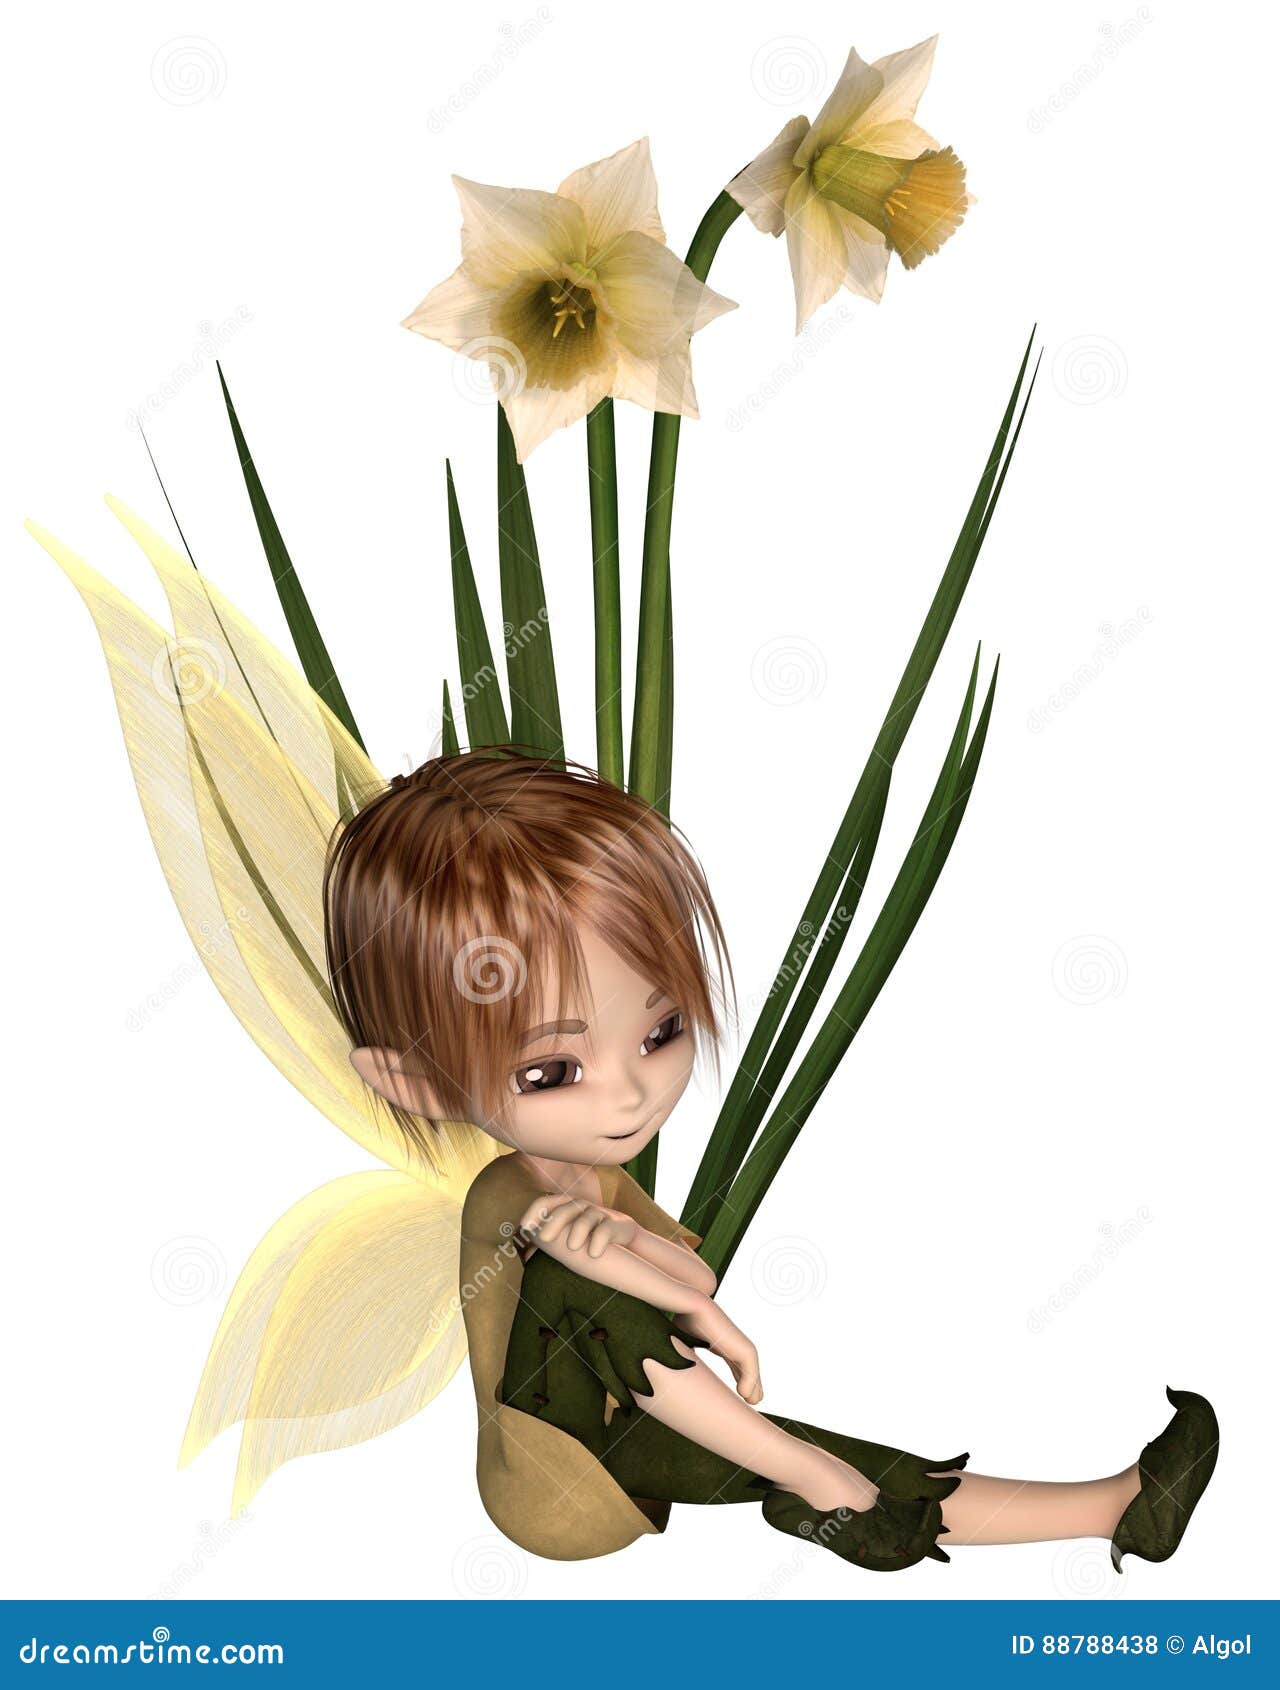 Cute Hanging Daffodil Fairy Perfect For Any Garden Or Home By Fountasia 